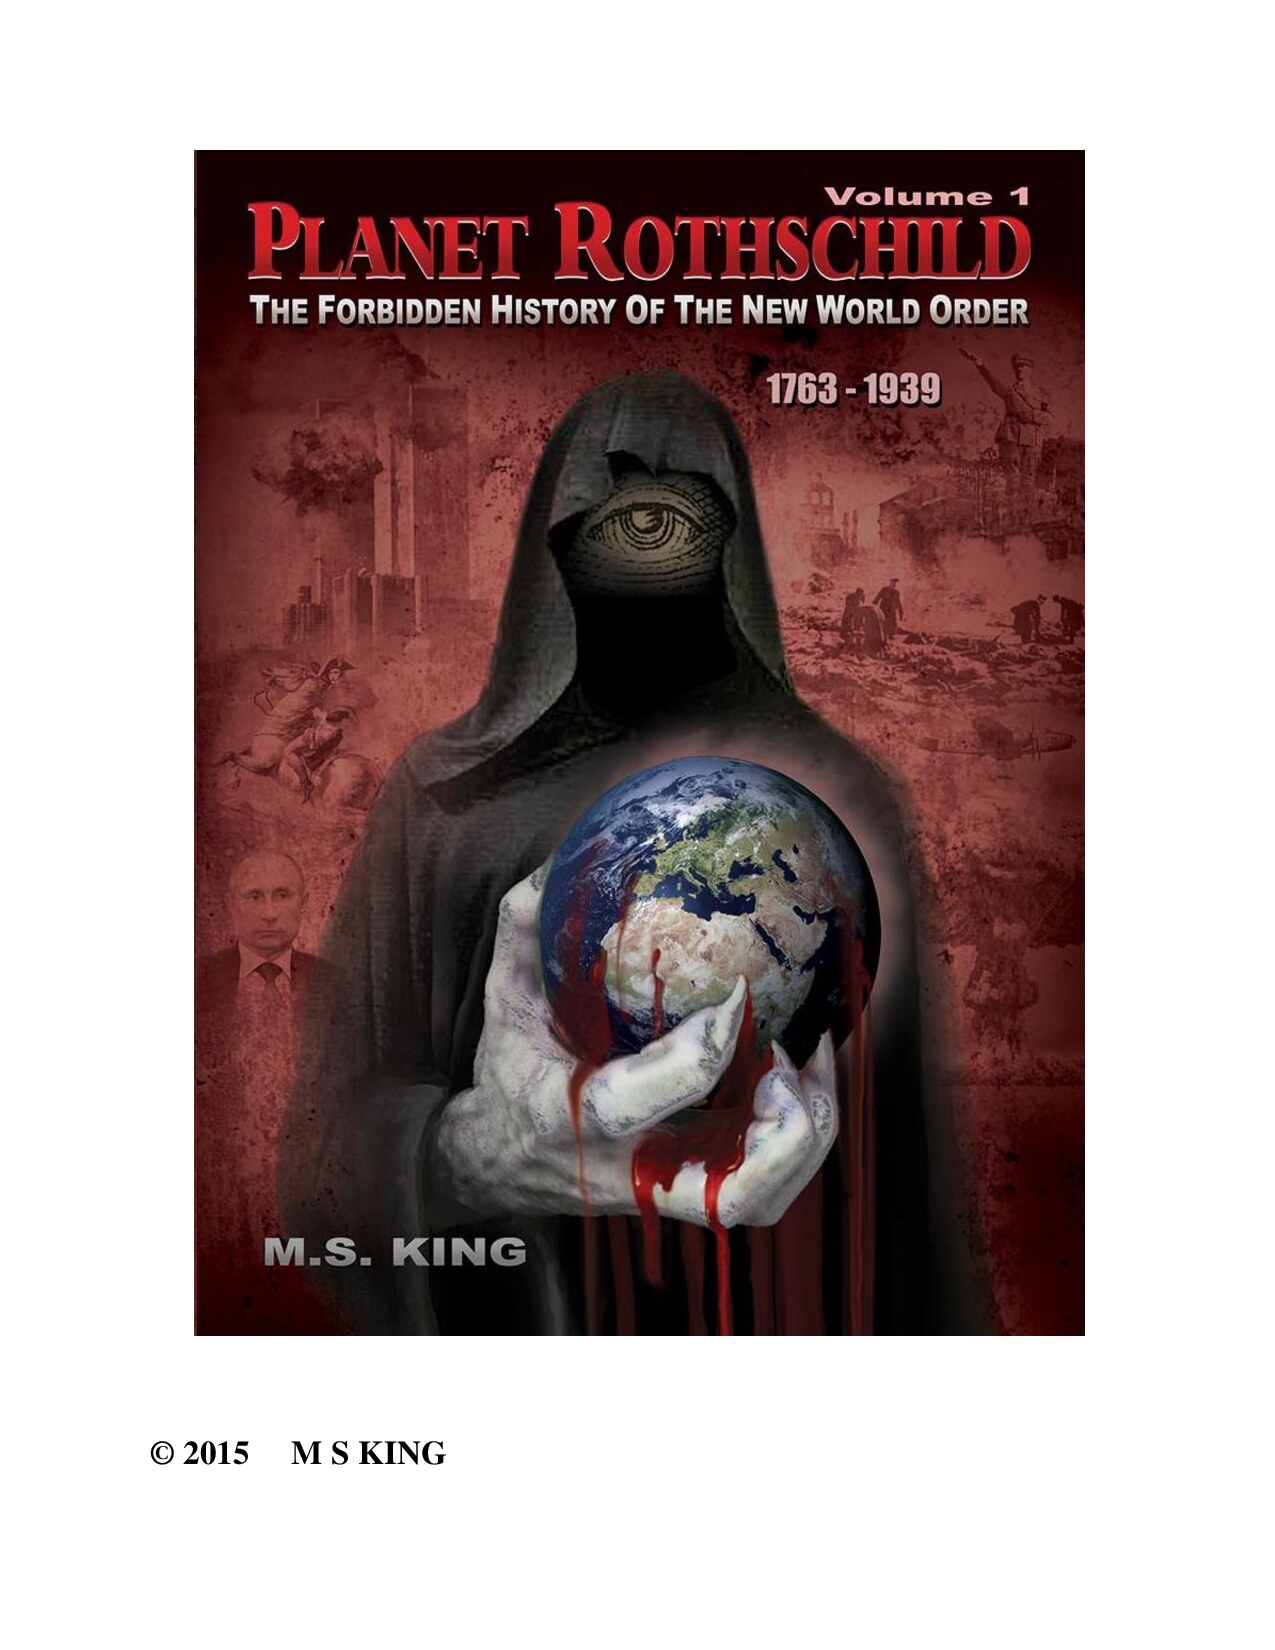 King, Mike S.; Planet Rothschild - The Forbidden History of the New World Order 1763-1939 (Part 1)